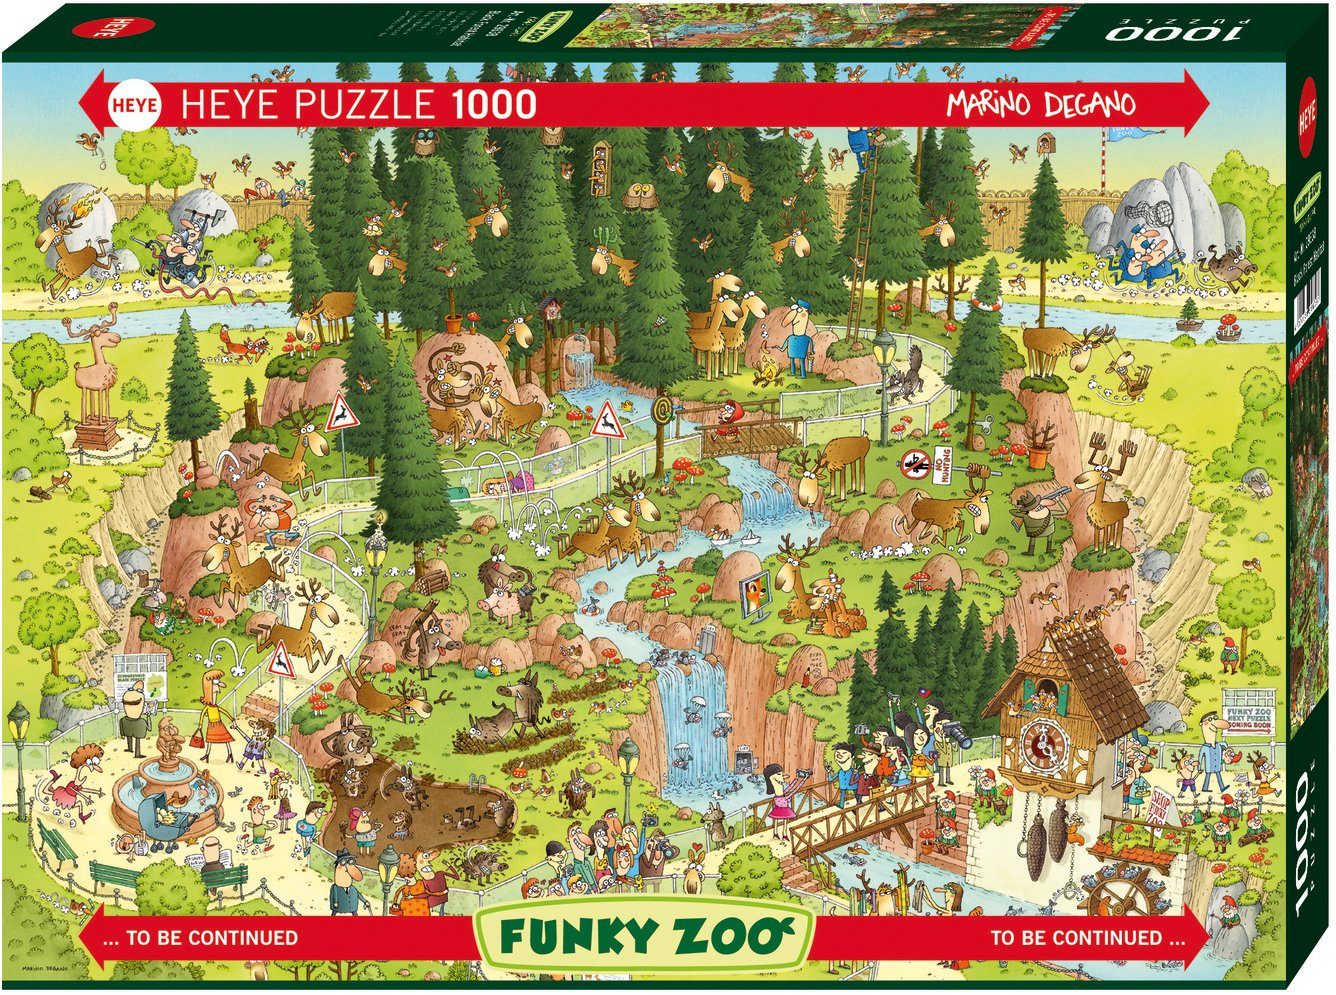 Made 1000 Forest in Puzzleteile, Habitat, HEYE Germany Black Puzzle